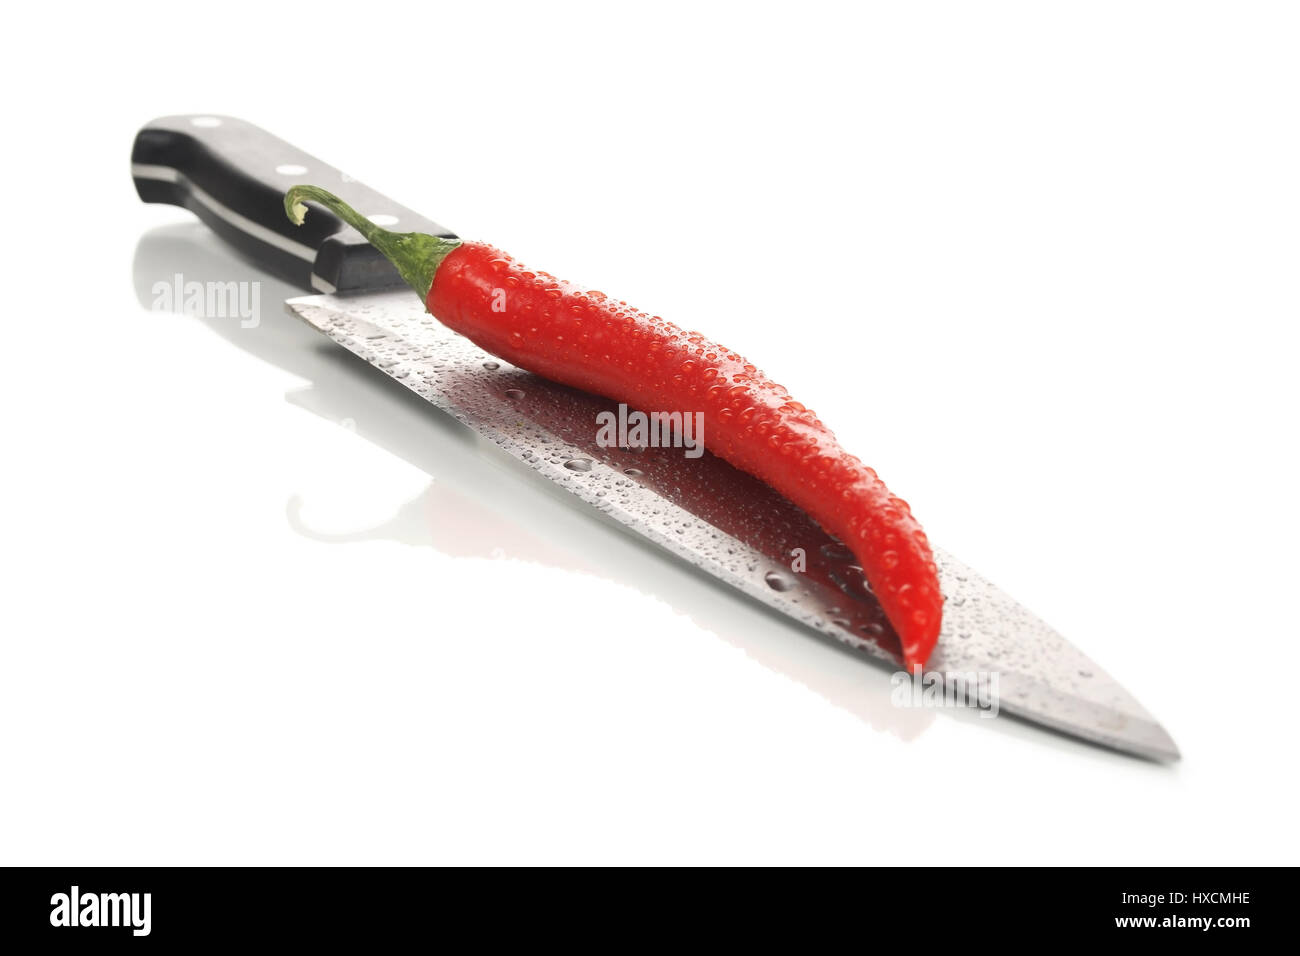 Culinary knife with a chilli, Kitchen knife with a red pepper |, Küchenmesser mit einer Peperoni |Kitchen knife with a red pepper| Stock Photo